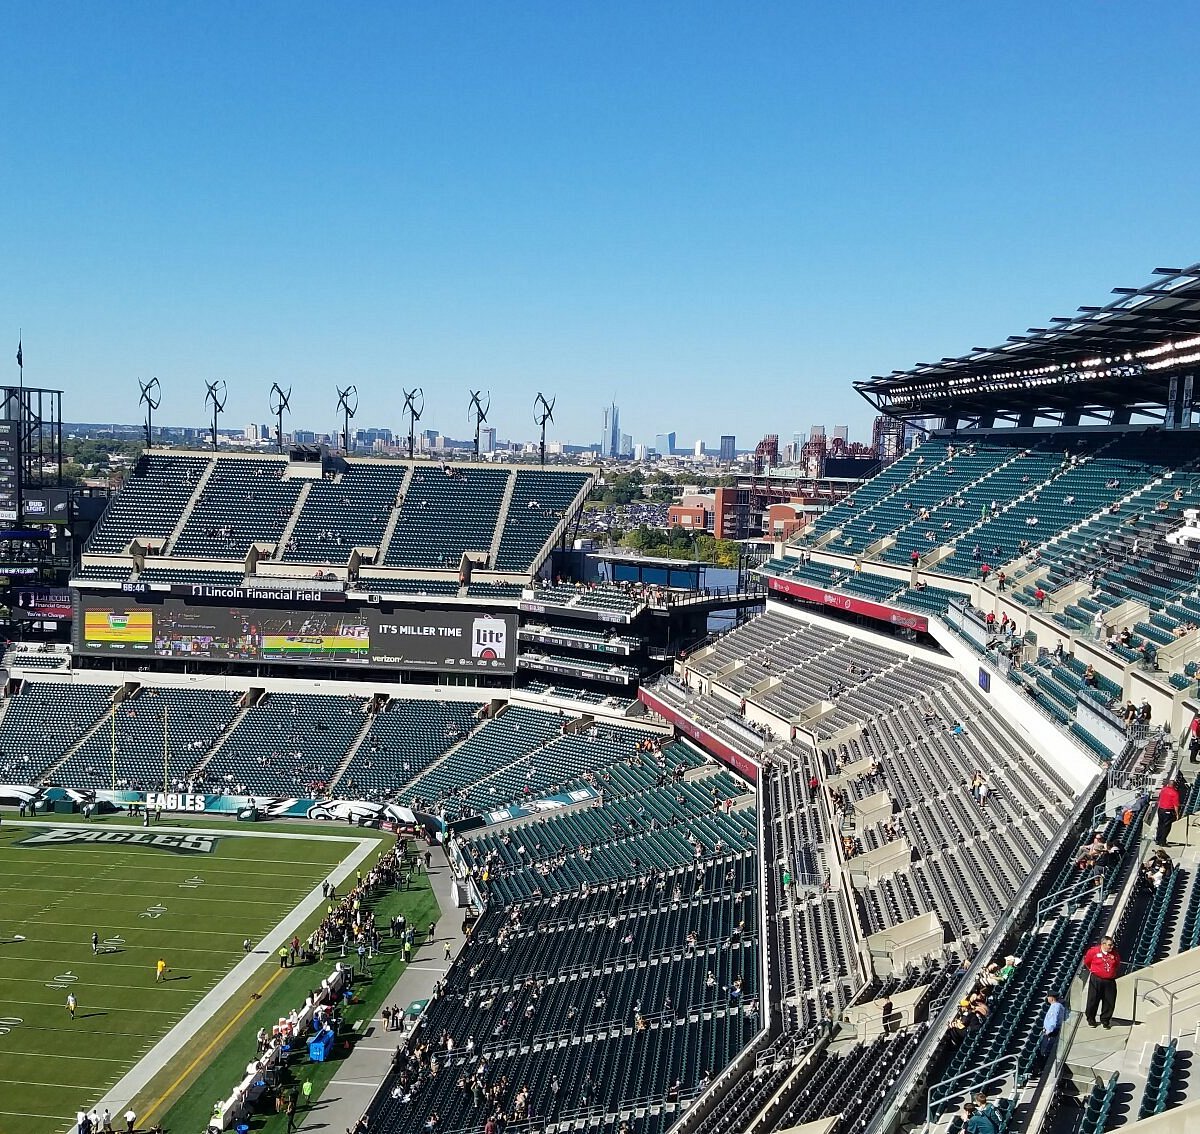 Breakdown Of The Lincoln Financial Field Seating Chart